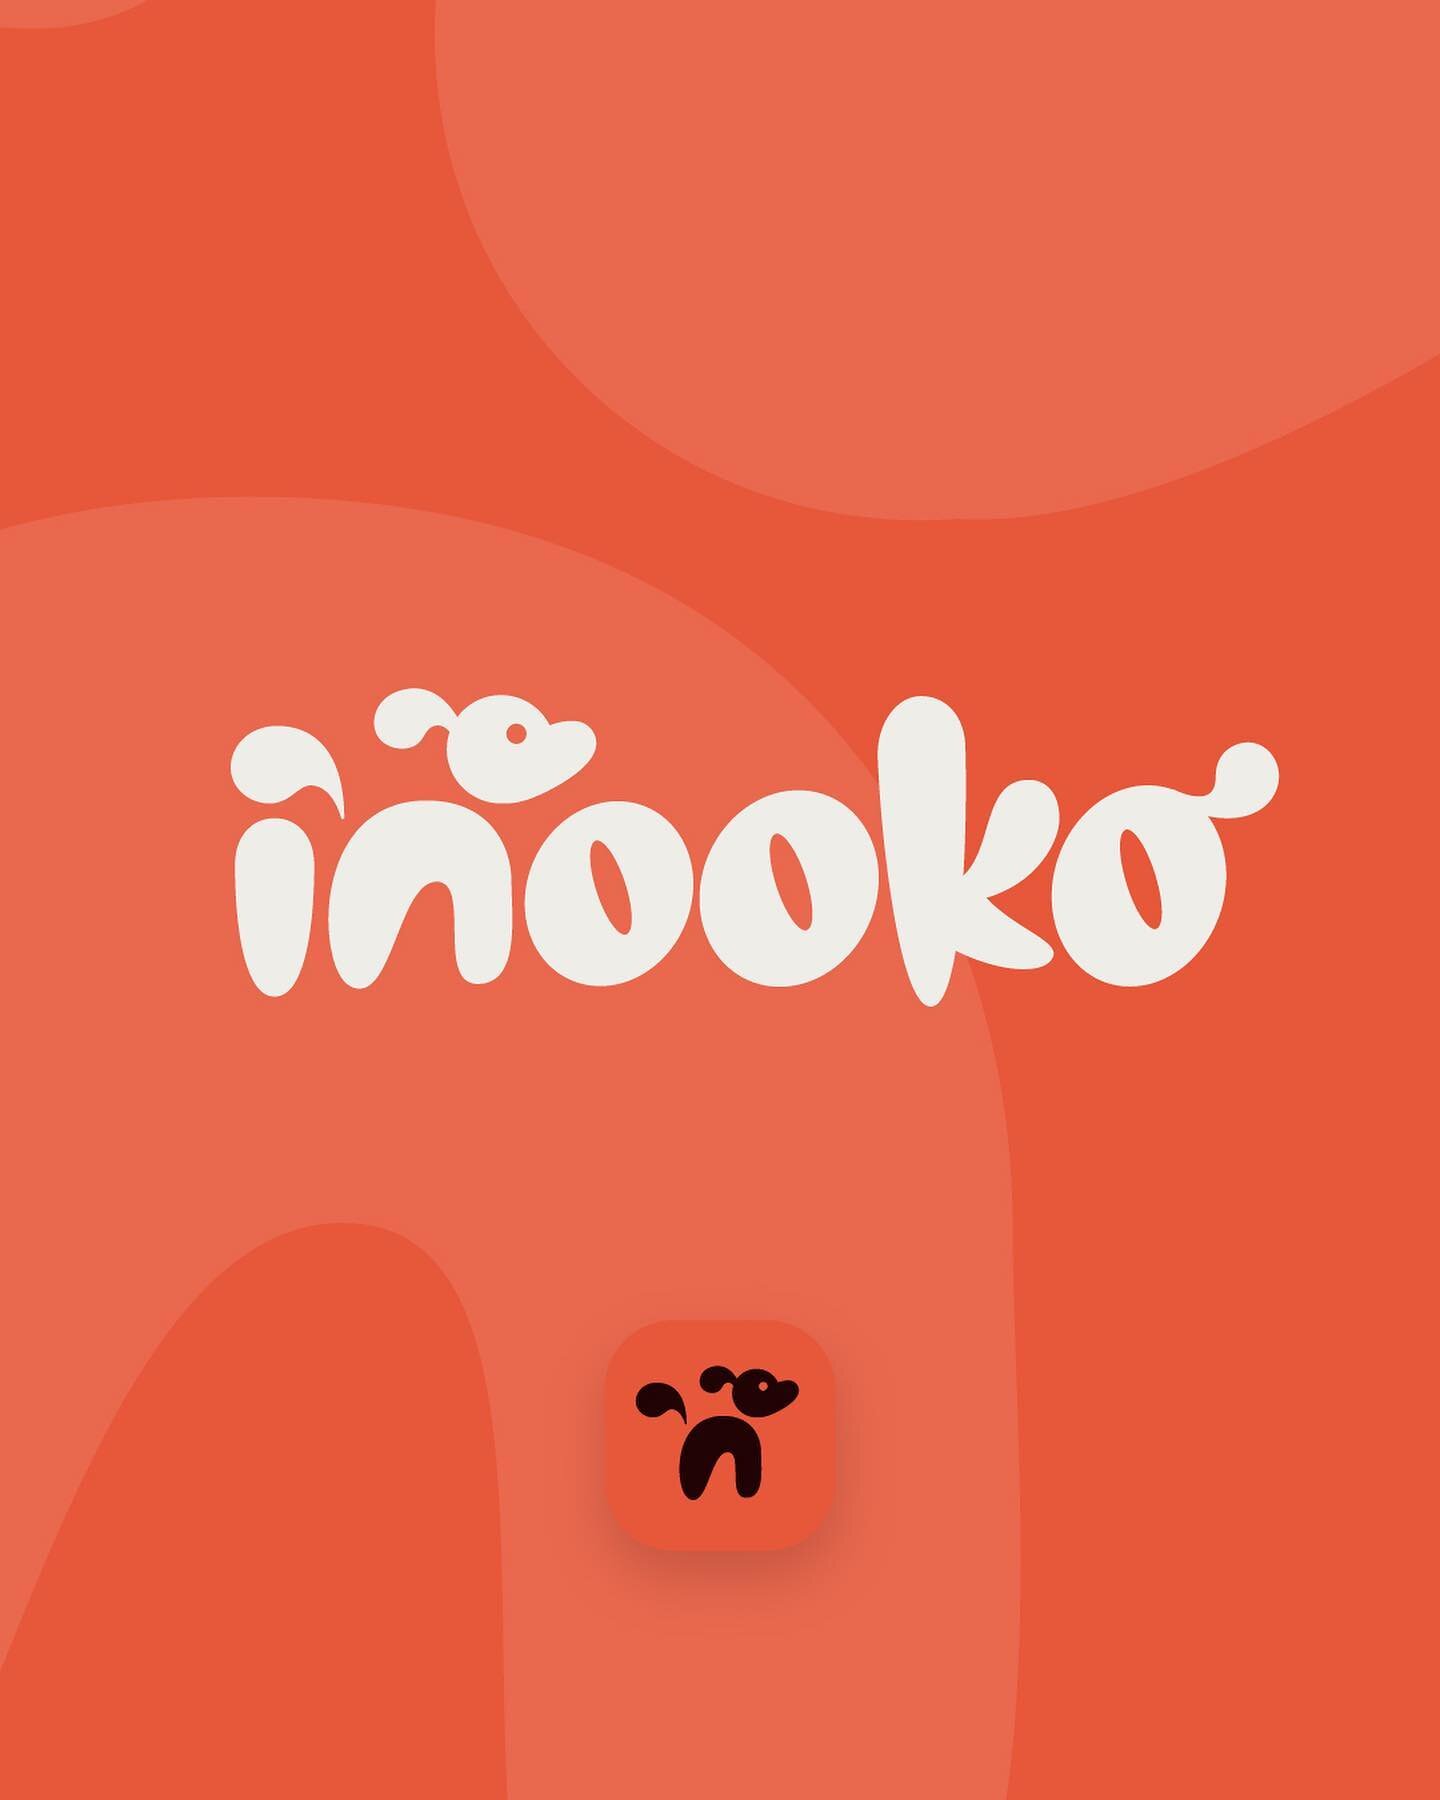 A refresh to the French pet and lifestyle brand, inooko. The name &ldquo;inooko&rdquo; is the combination of &ldquo;inu&rdquo; and &ldquo;neko&rdquo; which means &ldquo;dog&rdquo; and &ldquo;cat&rdquo; in Japanese. We explored a wide range of hand-le